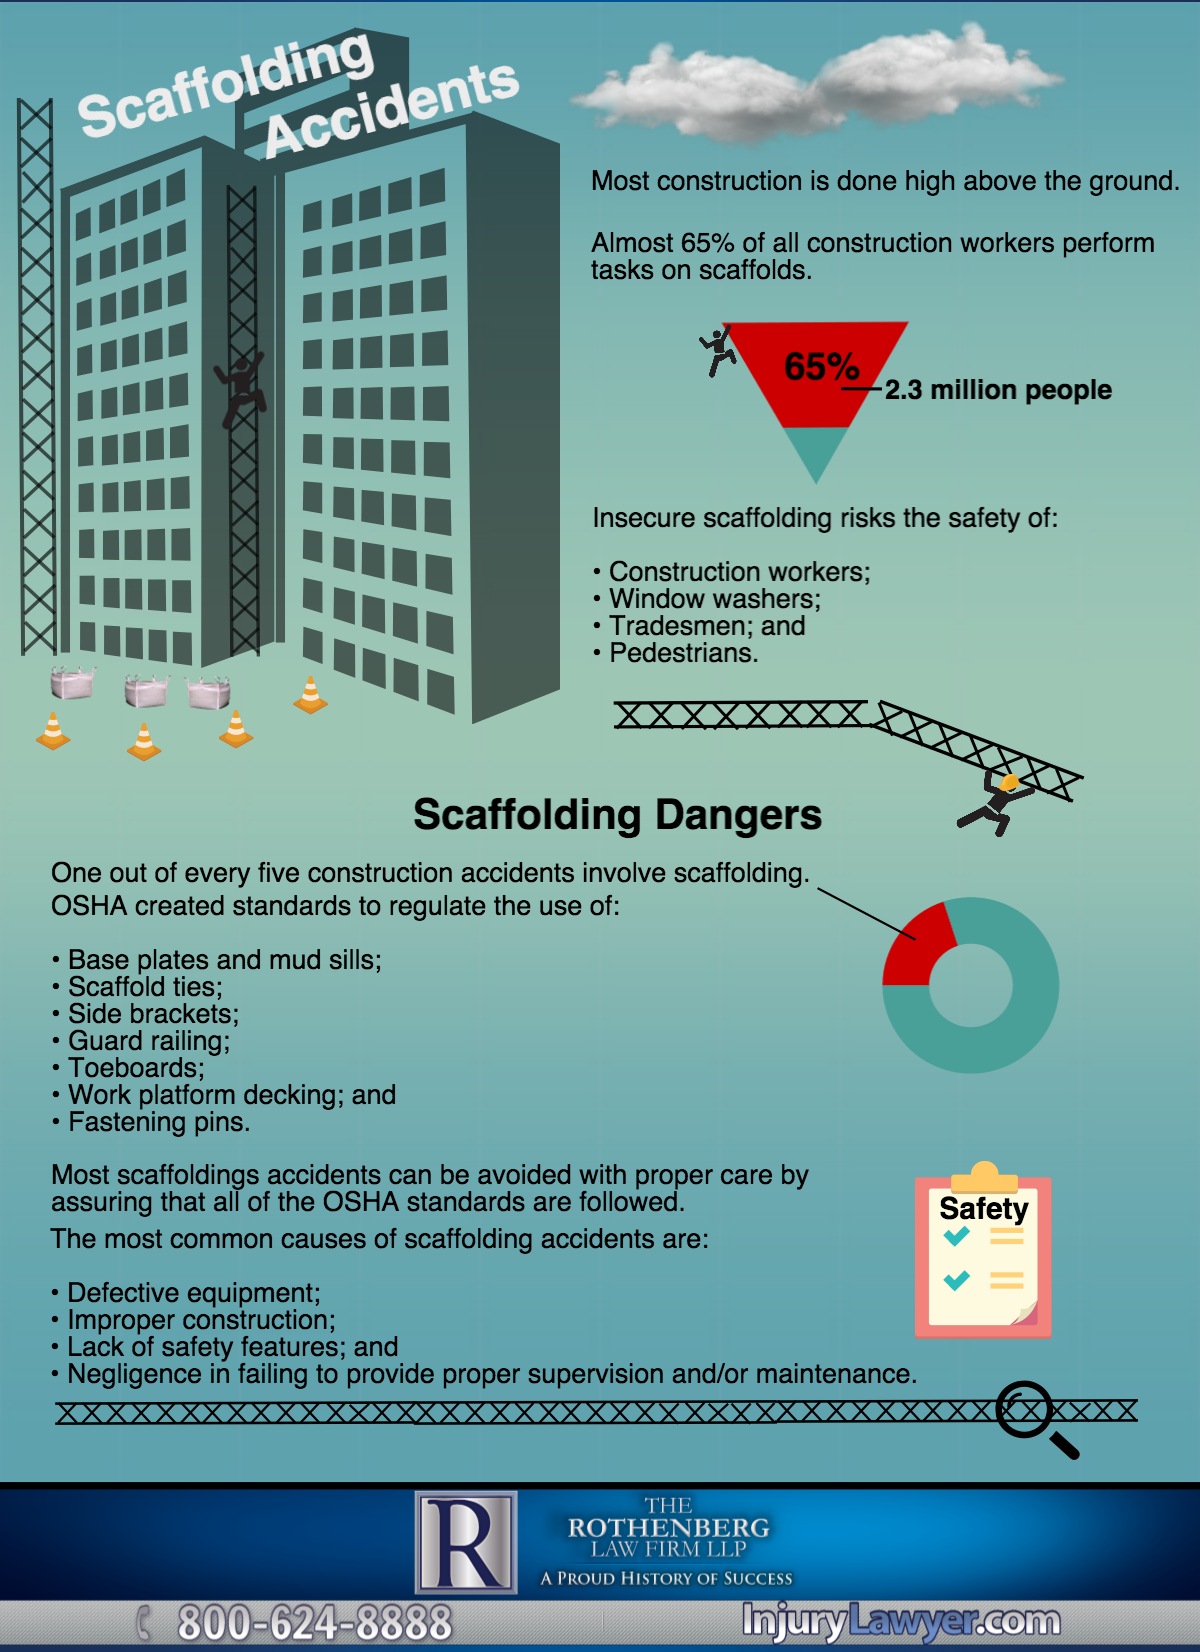 Scaffolding Accidents Infographic